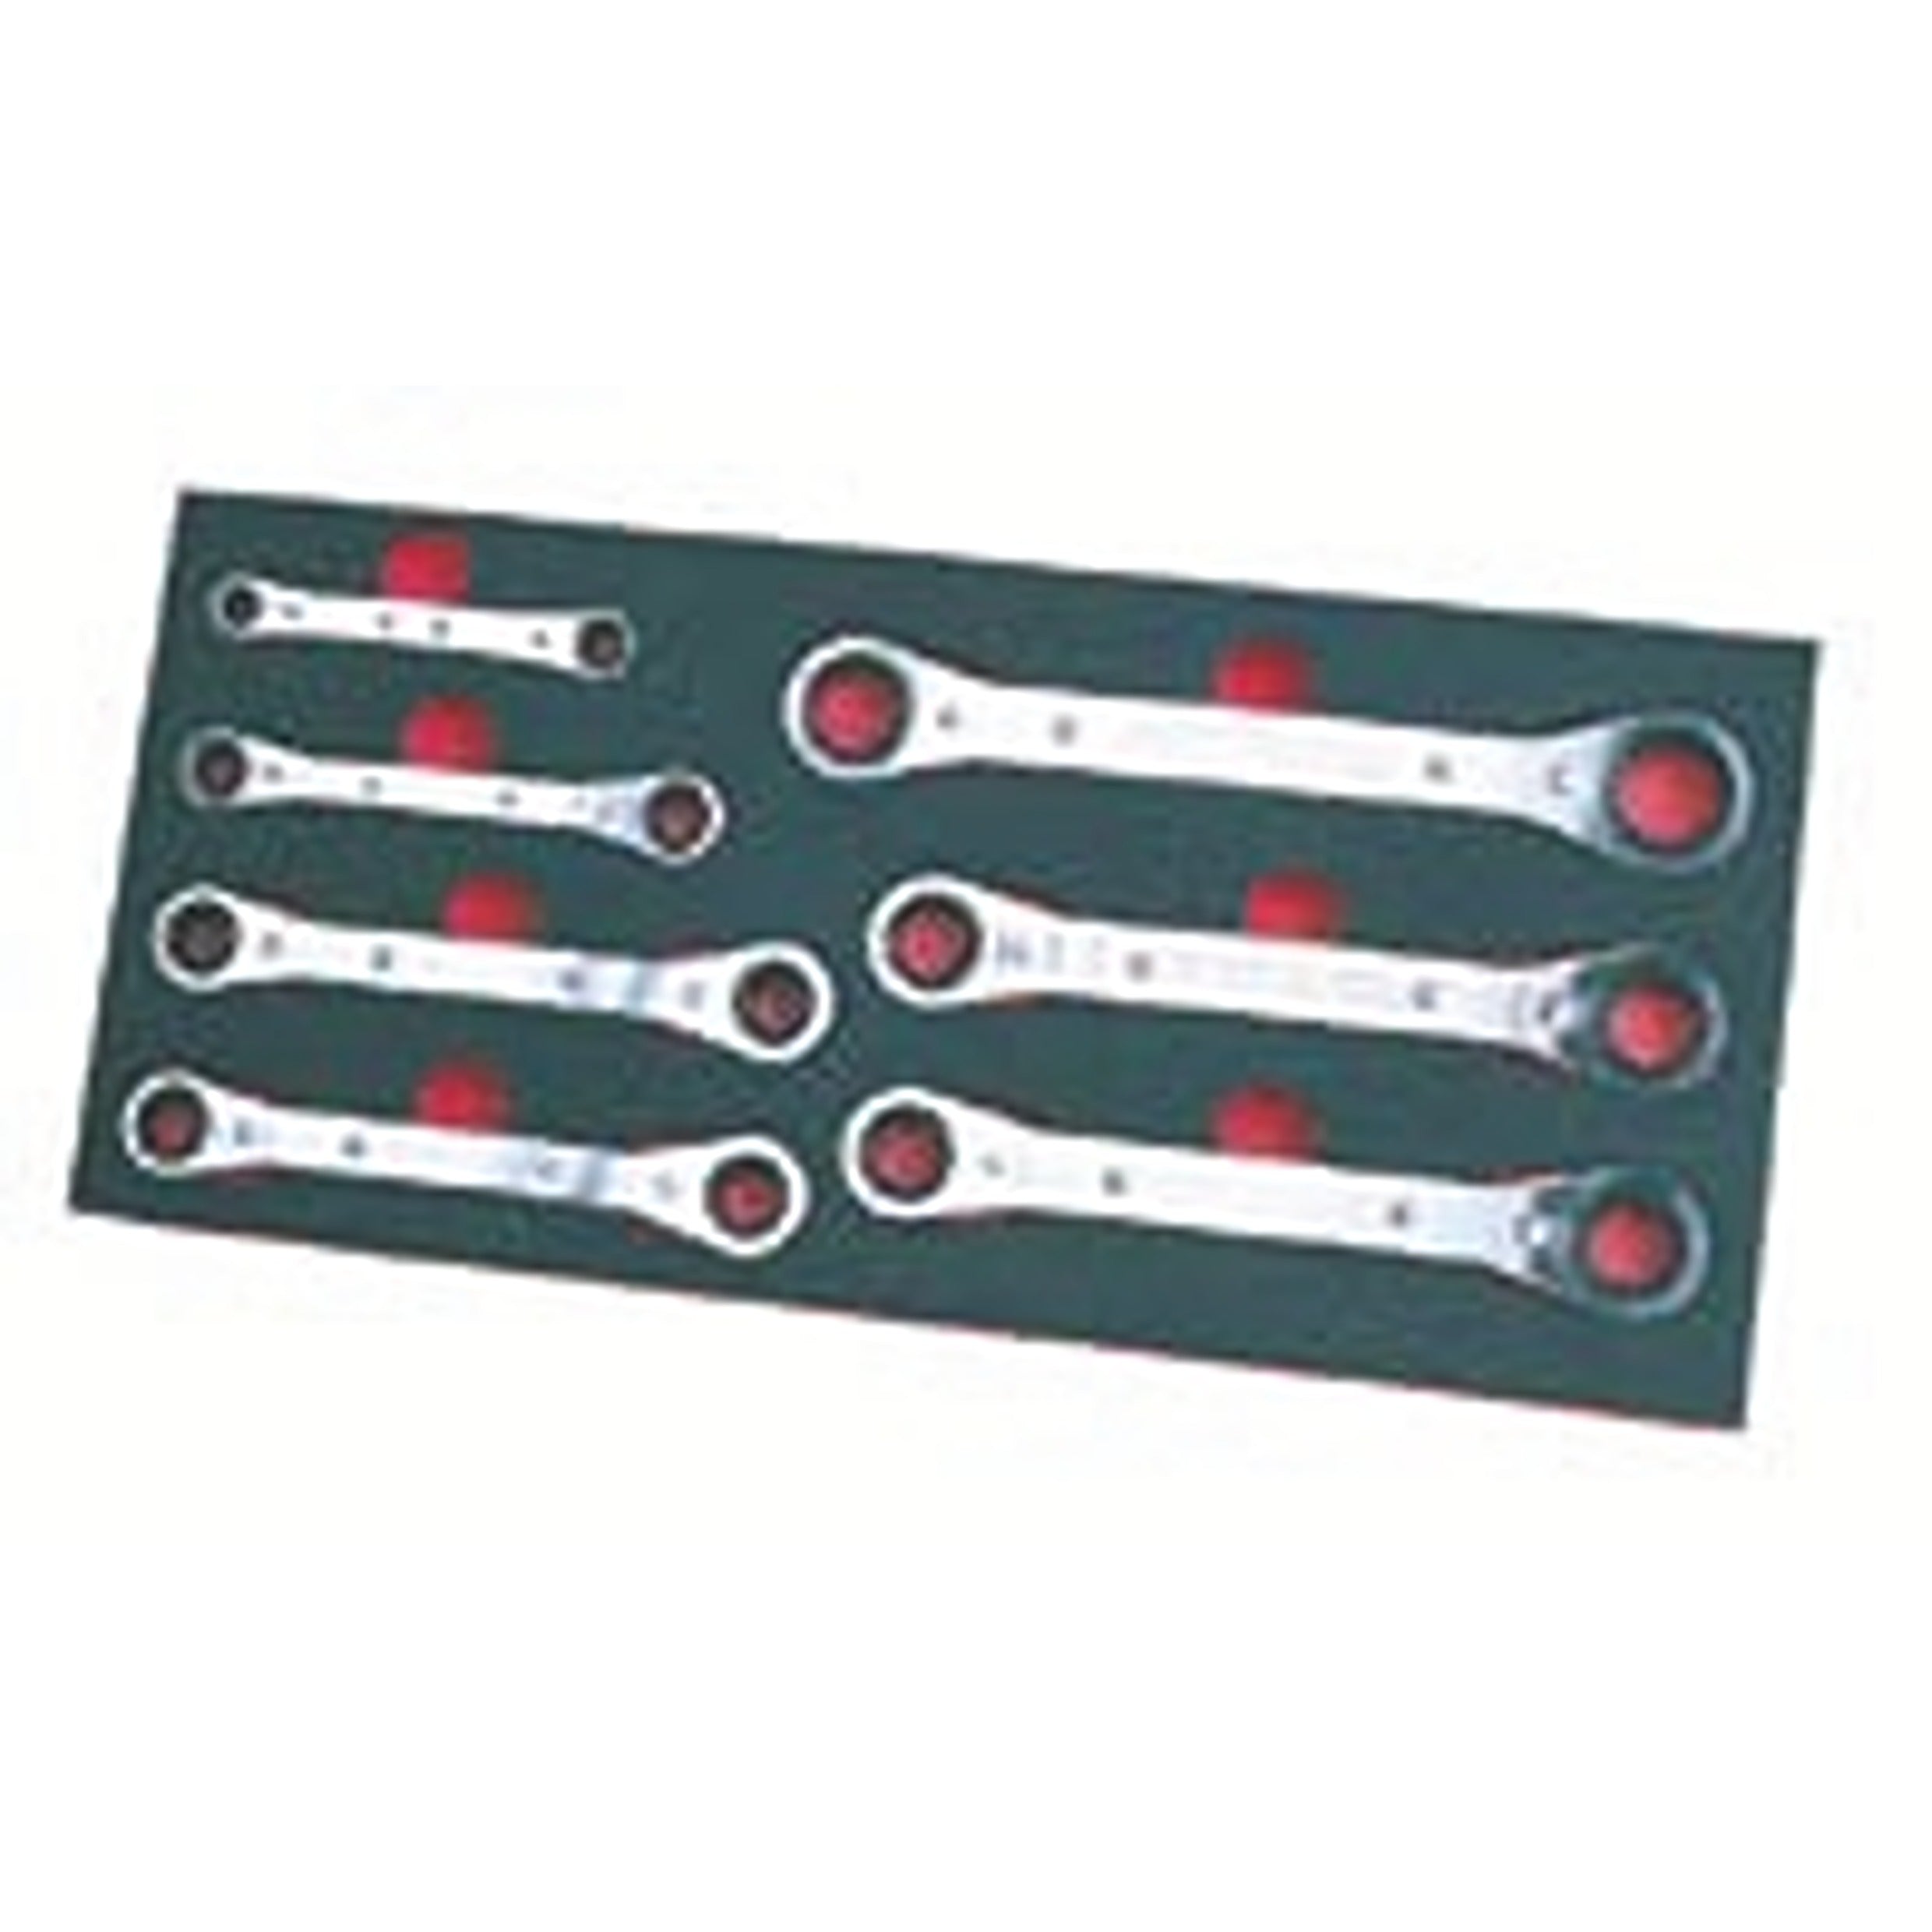 BRITOOL RCHWRENCH1 6 Piece Ring Ratchet Wrench Set Box (BRITOOL) - Premium Ring Ratchet Wrench Set from BRITOOL - Shop now at Yew Aik.